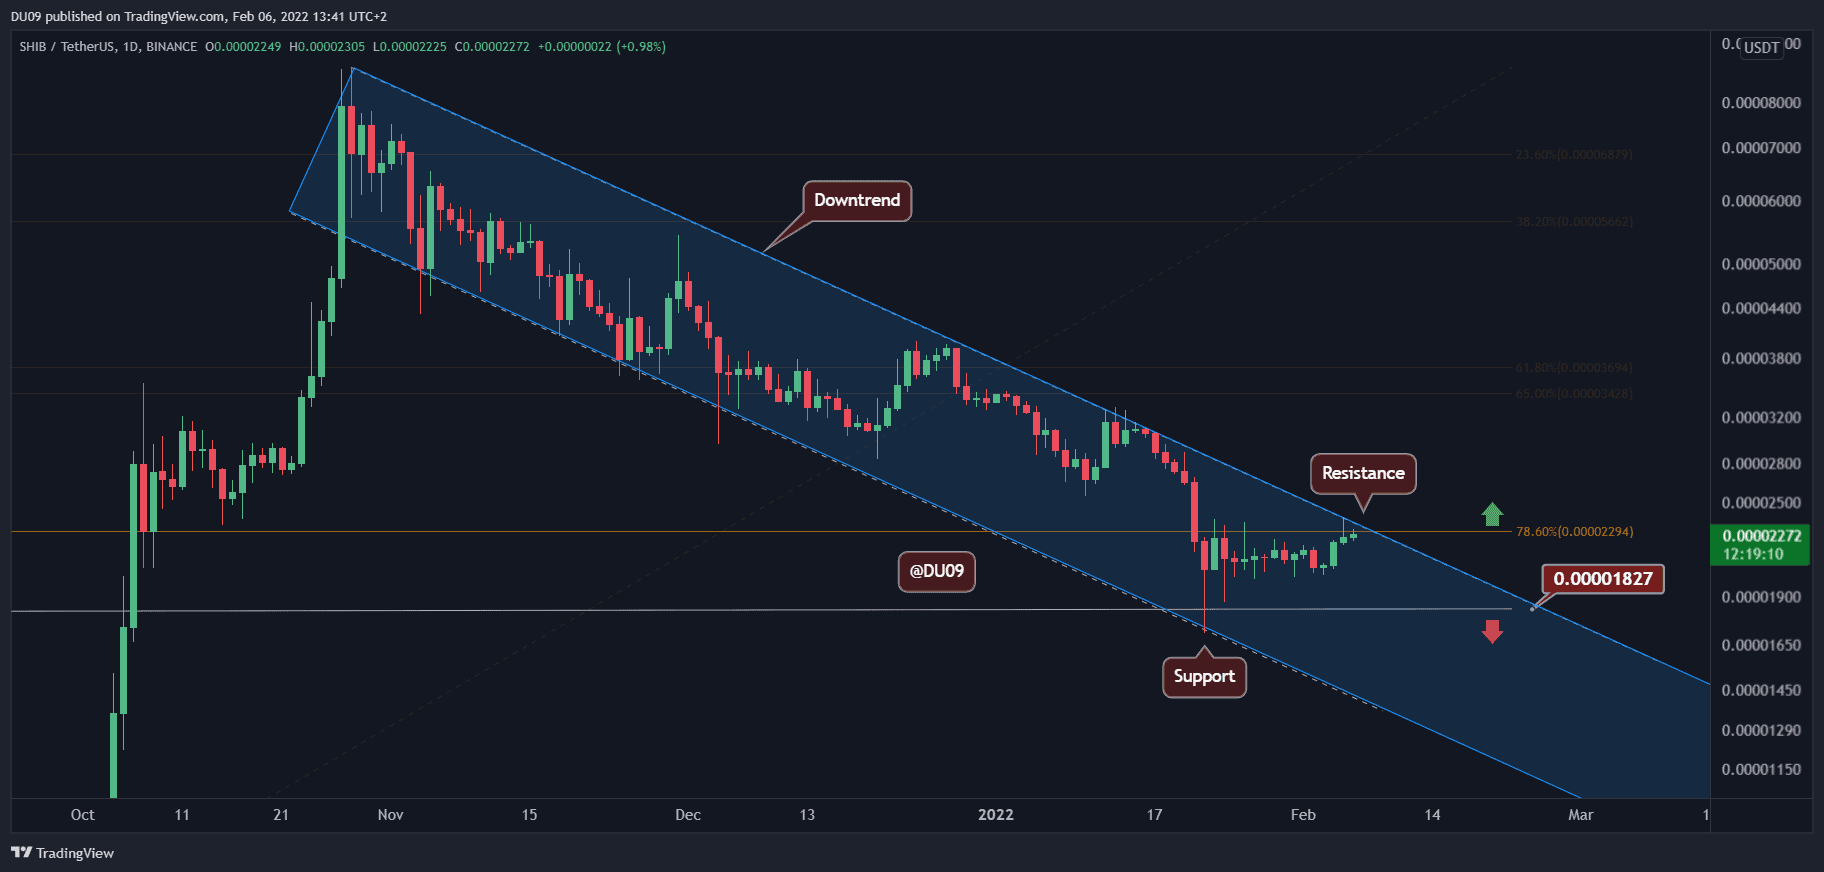 SHIB is Facing Huge Resistance that Can End the Bearish Trend